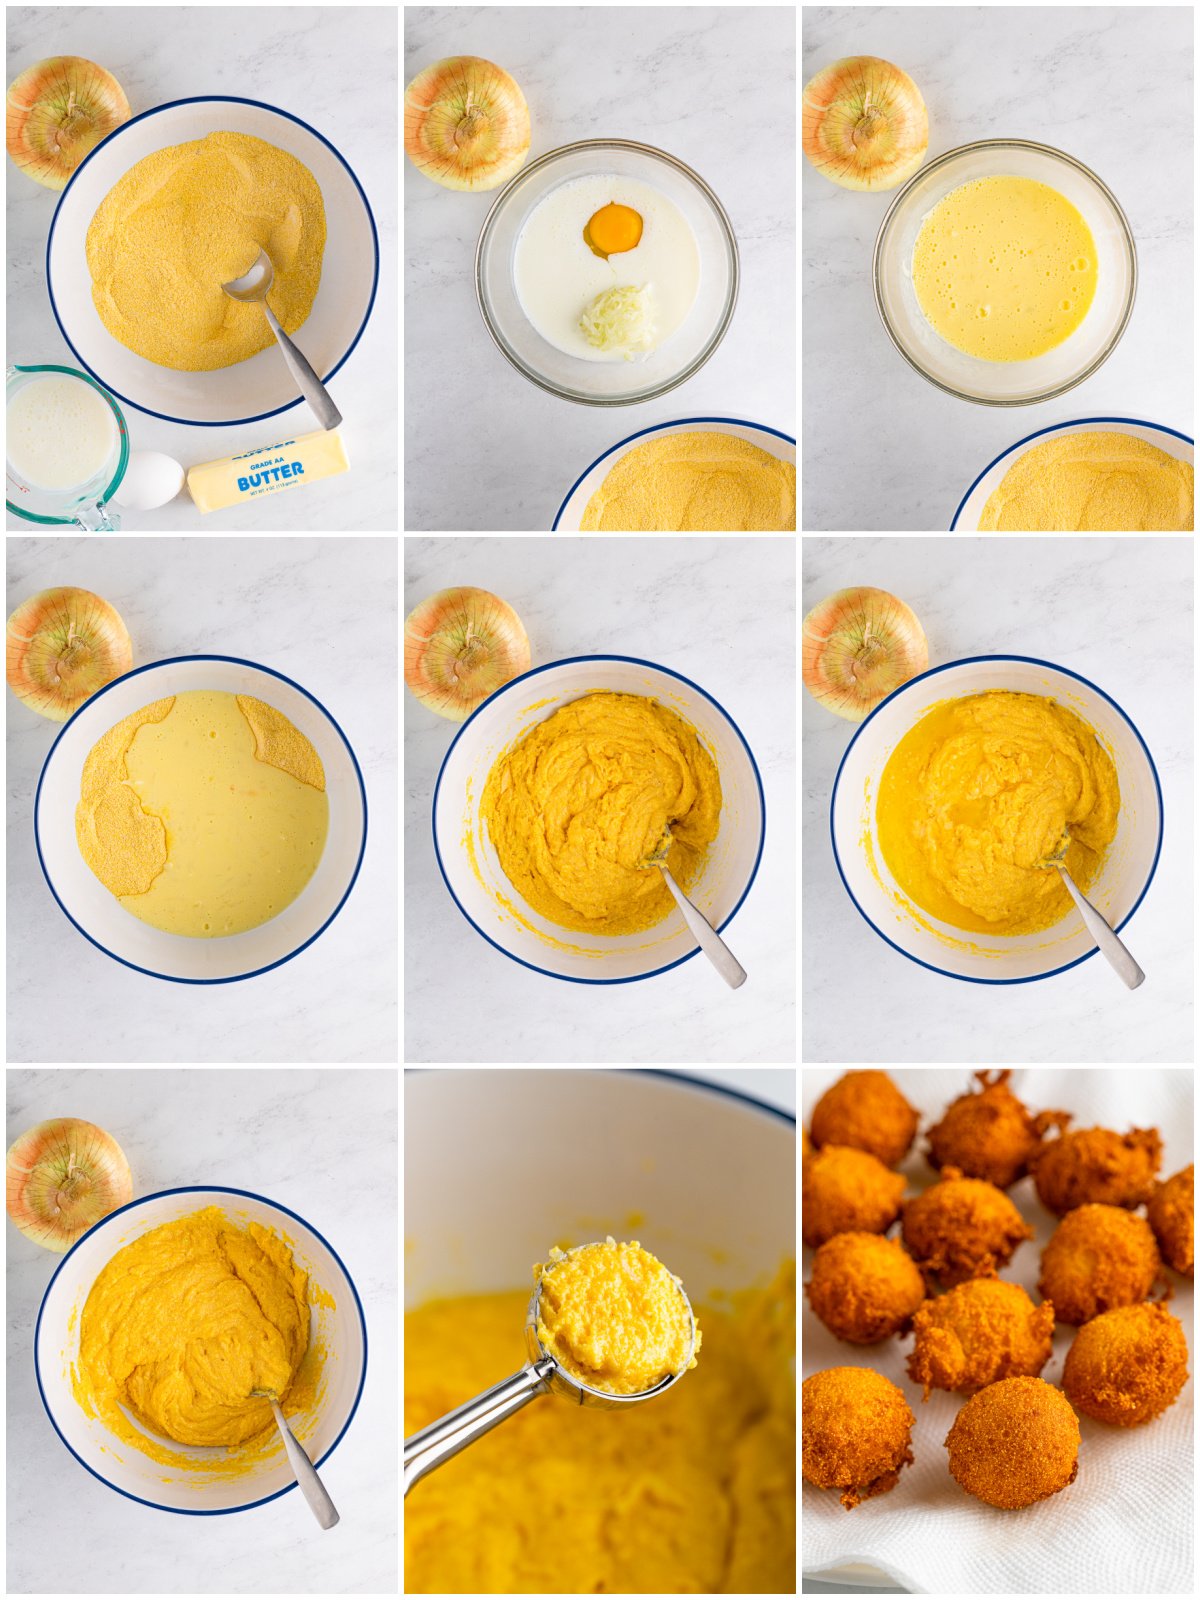 Step by step photos on how to make a Hush Puppy Recipe.